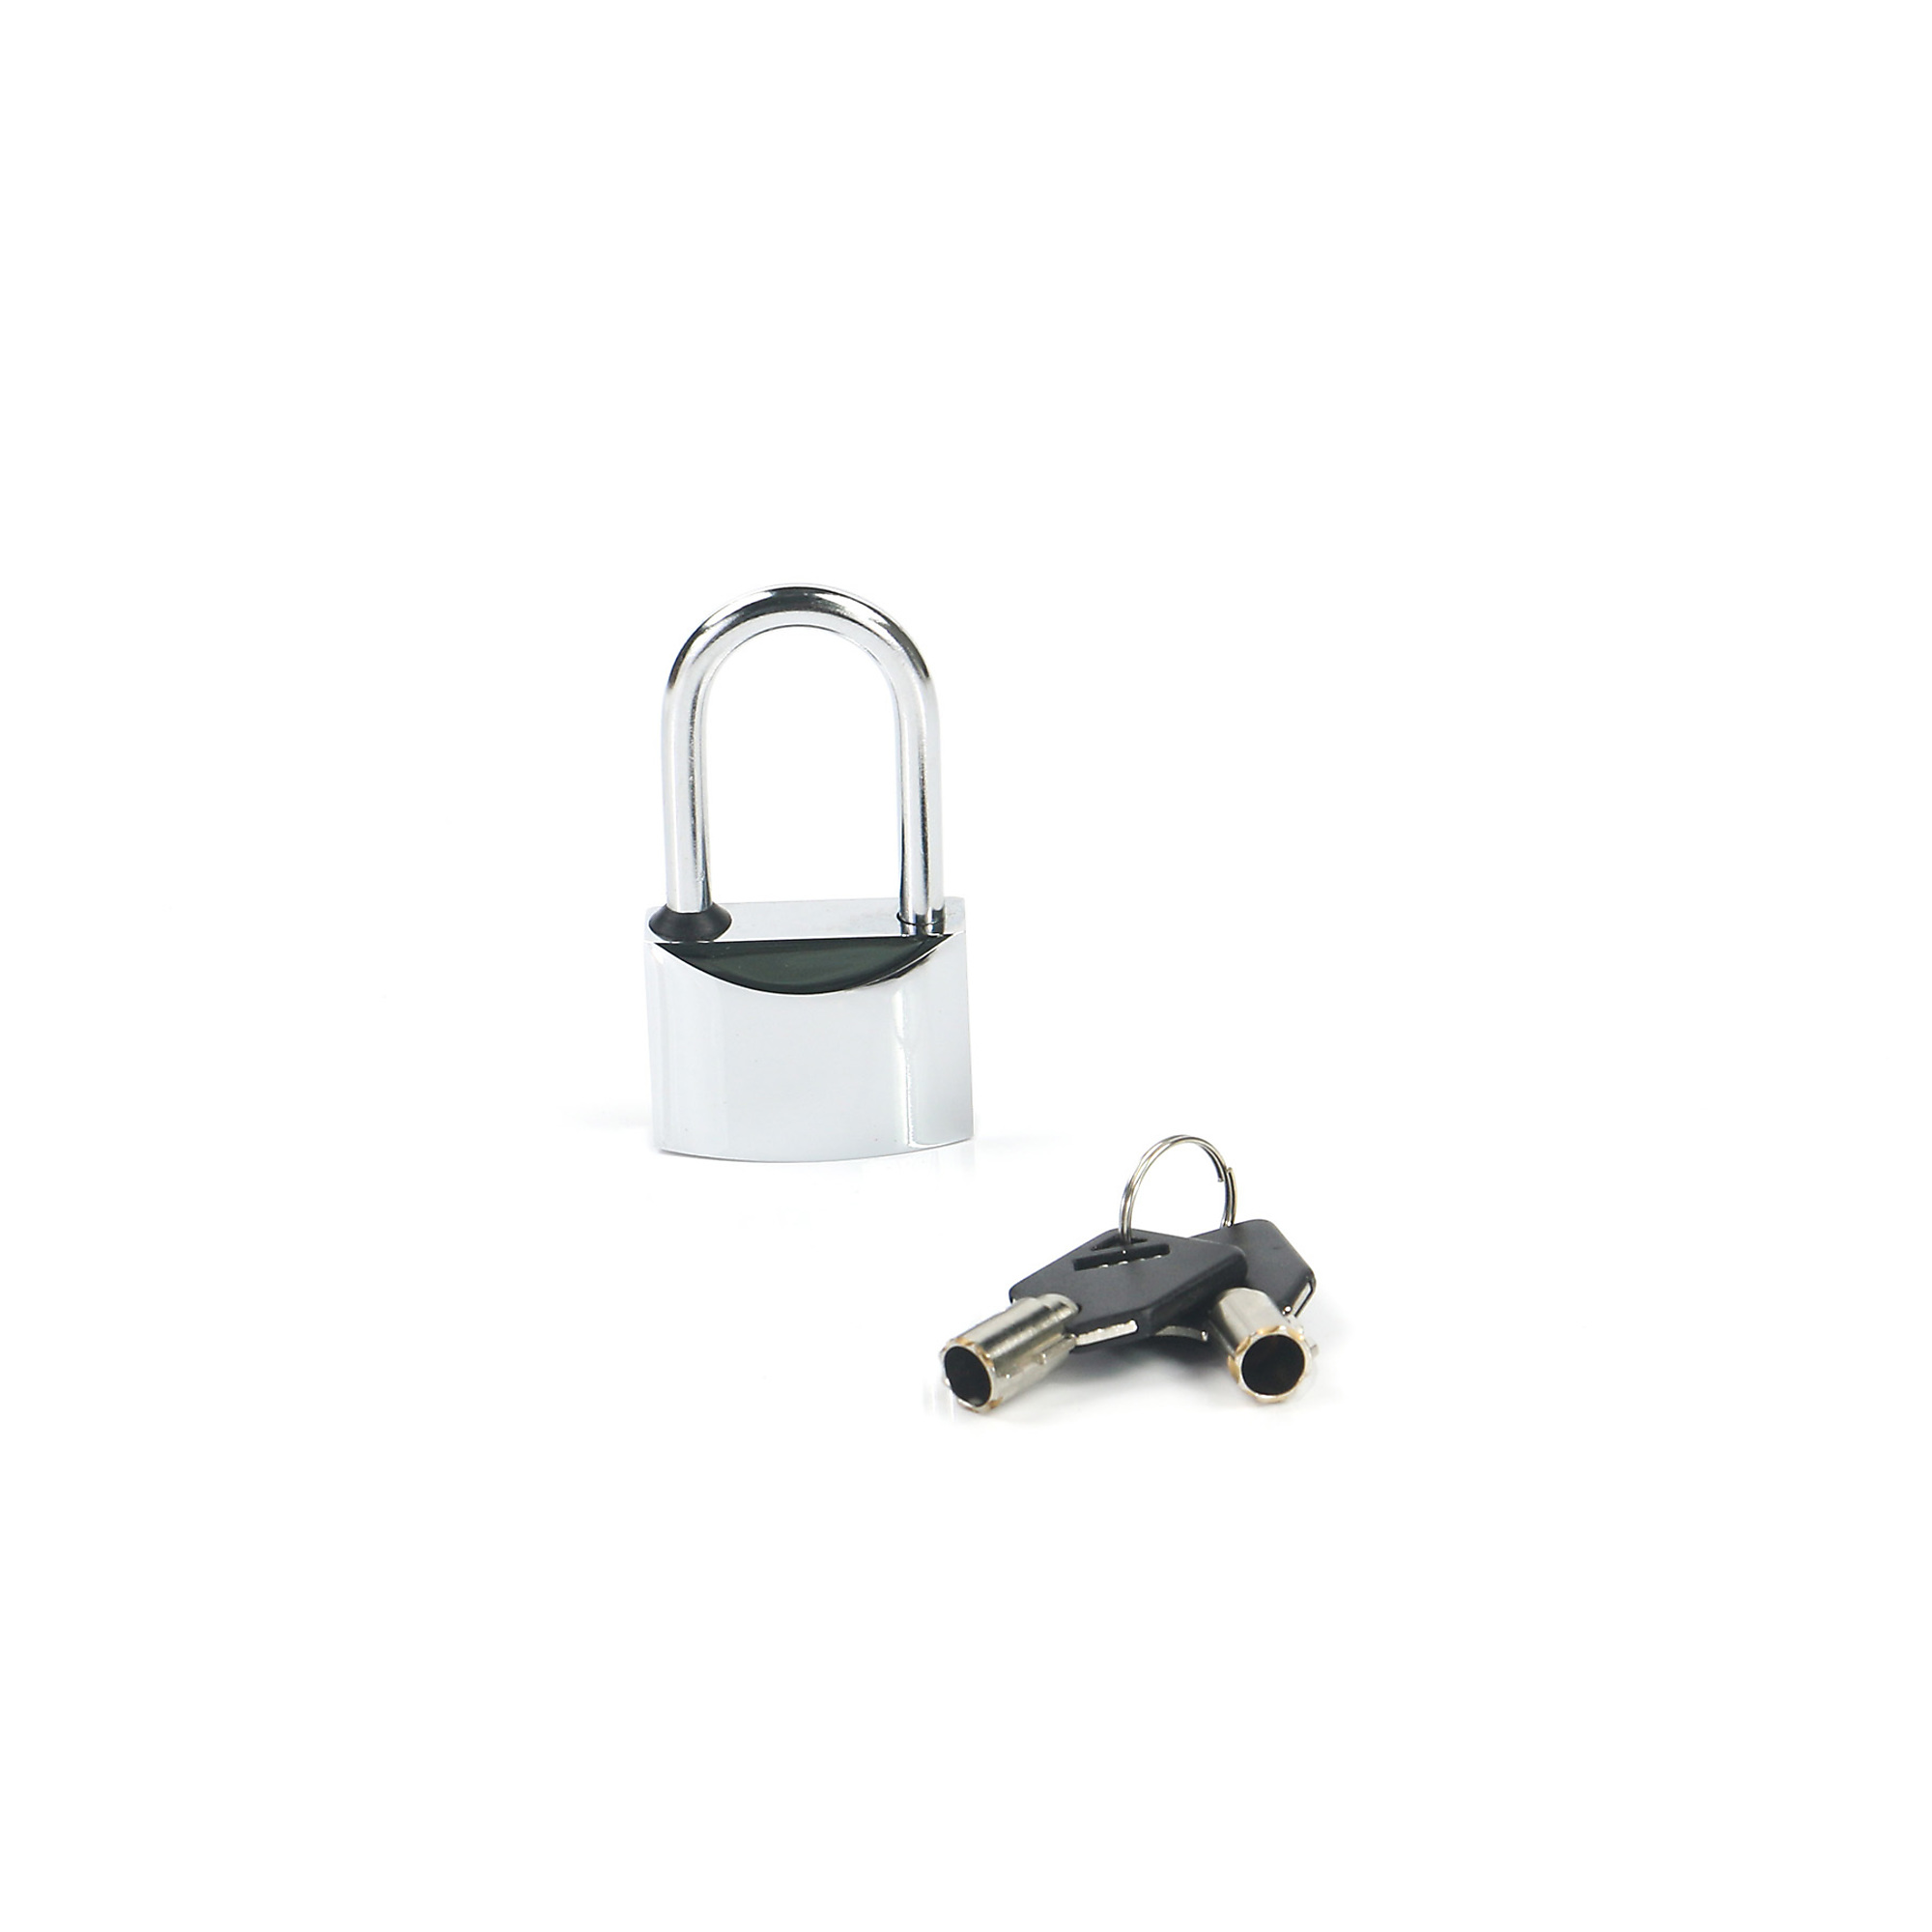 Weigh-Safe, QTY 1 Padlock -KEYED-ALIKE, Gross Towing Weight 3,500 lb, Class Rating N/A, Model WS12